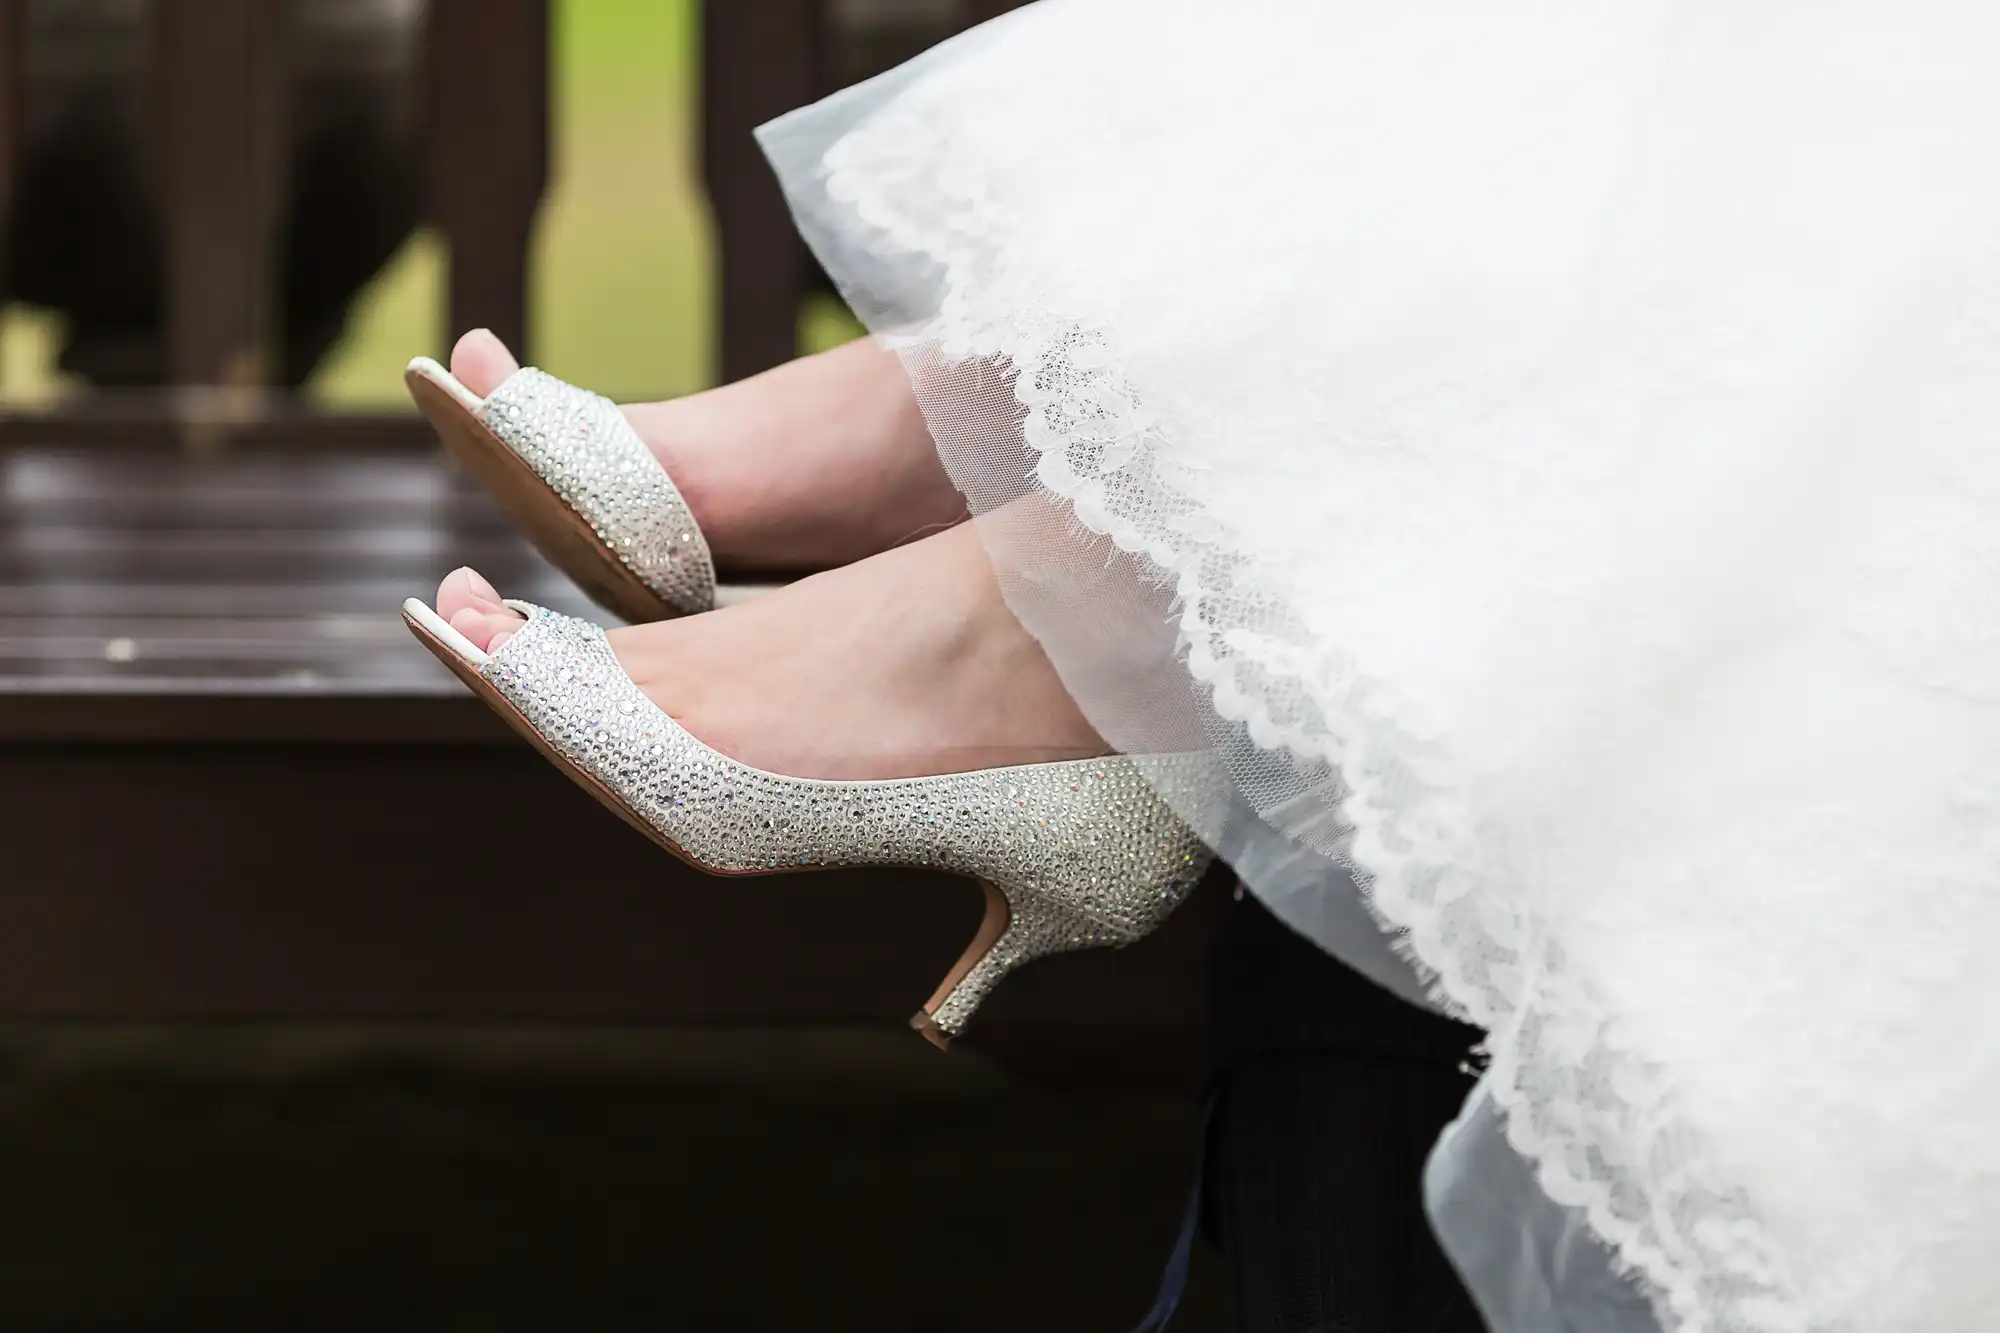 Bride wearing sparkly silver high heels, peeking from under a white lace wedding dress, seated on a bench.